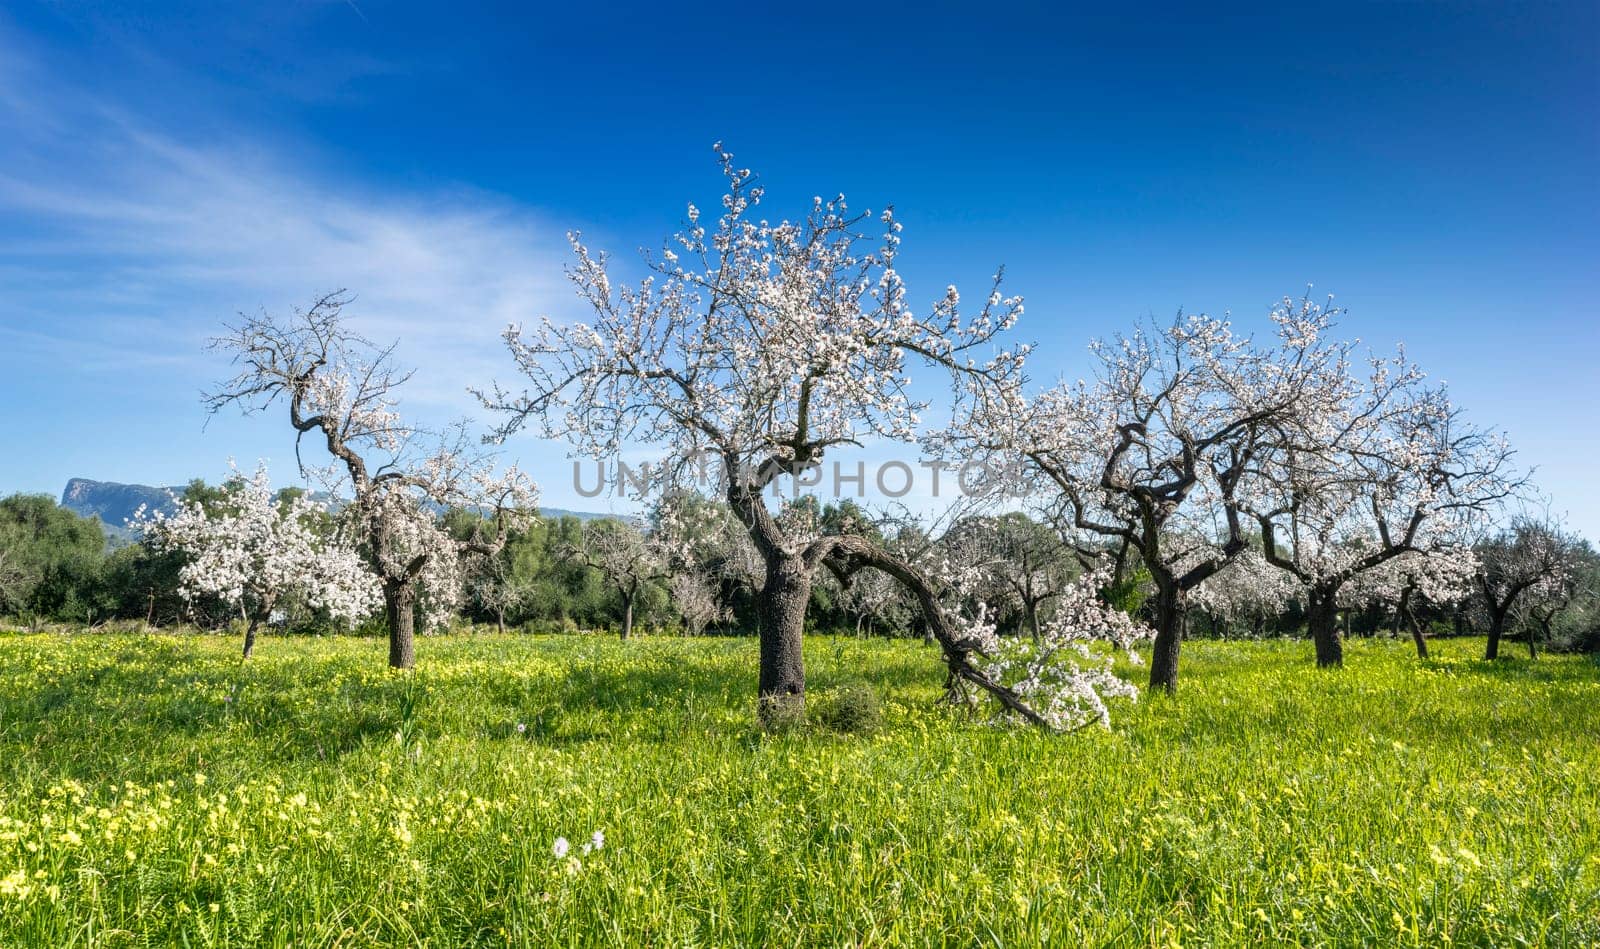 Enchanted Spring Dance: Gnarl-Branched Trees Amidst Verdant Wildflower Fields by Juanjo39